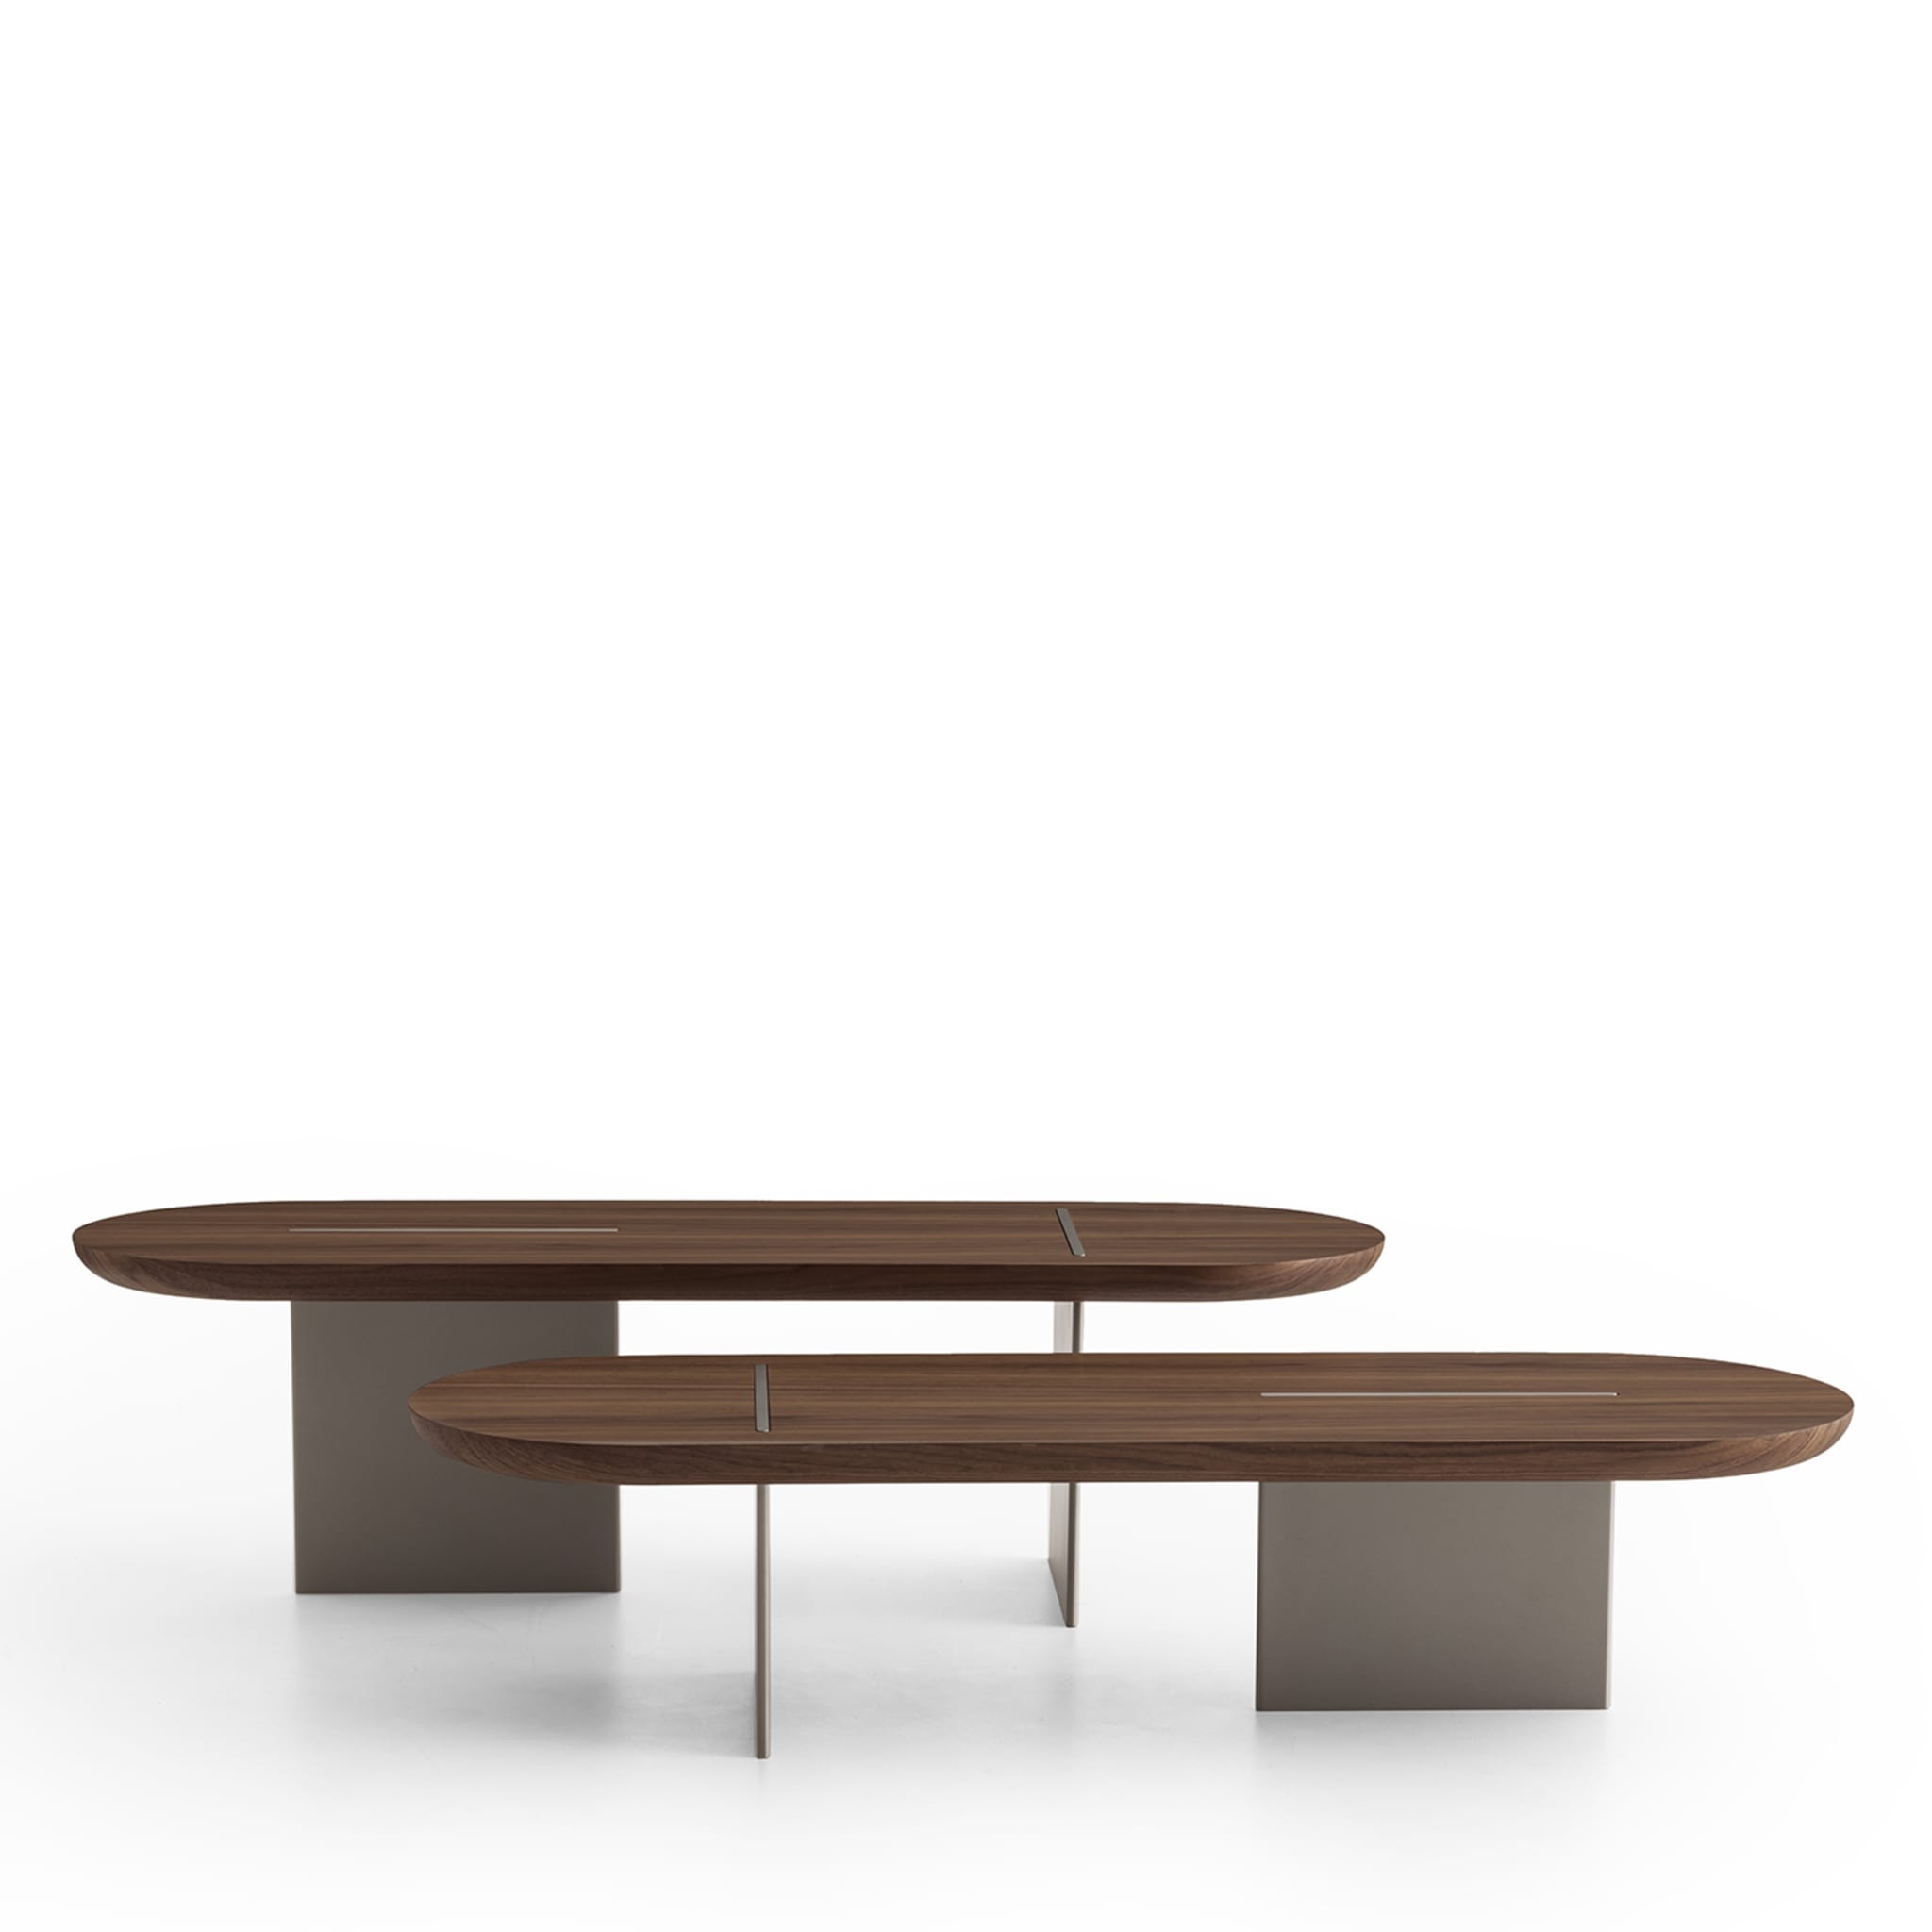 Baguette Low Rounded Canaletto Walnut Coffee Table - Alternative view 1